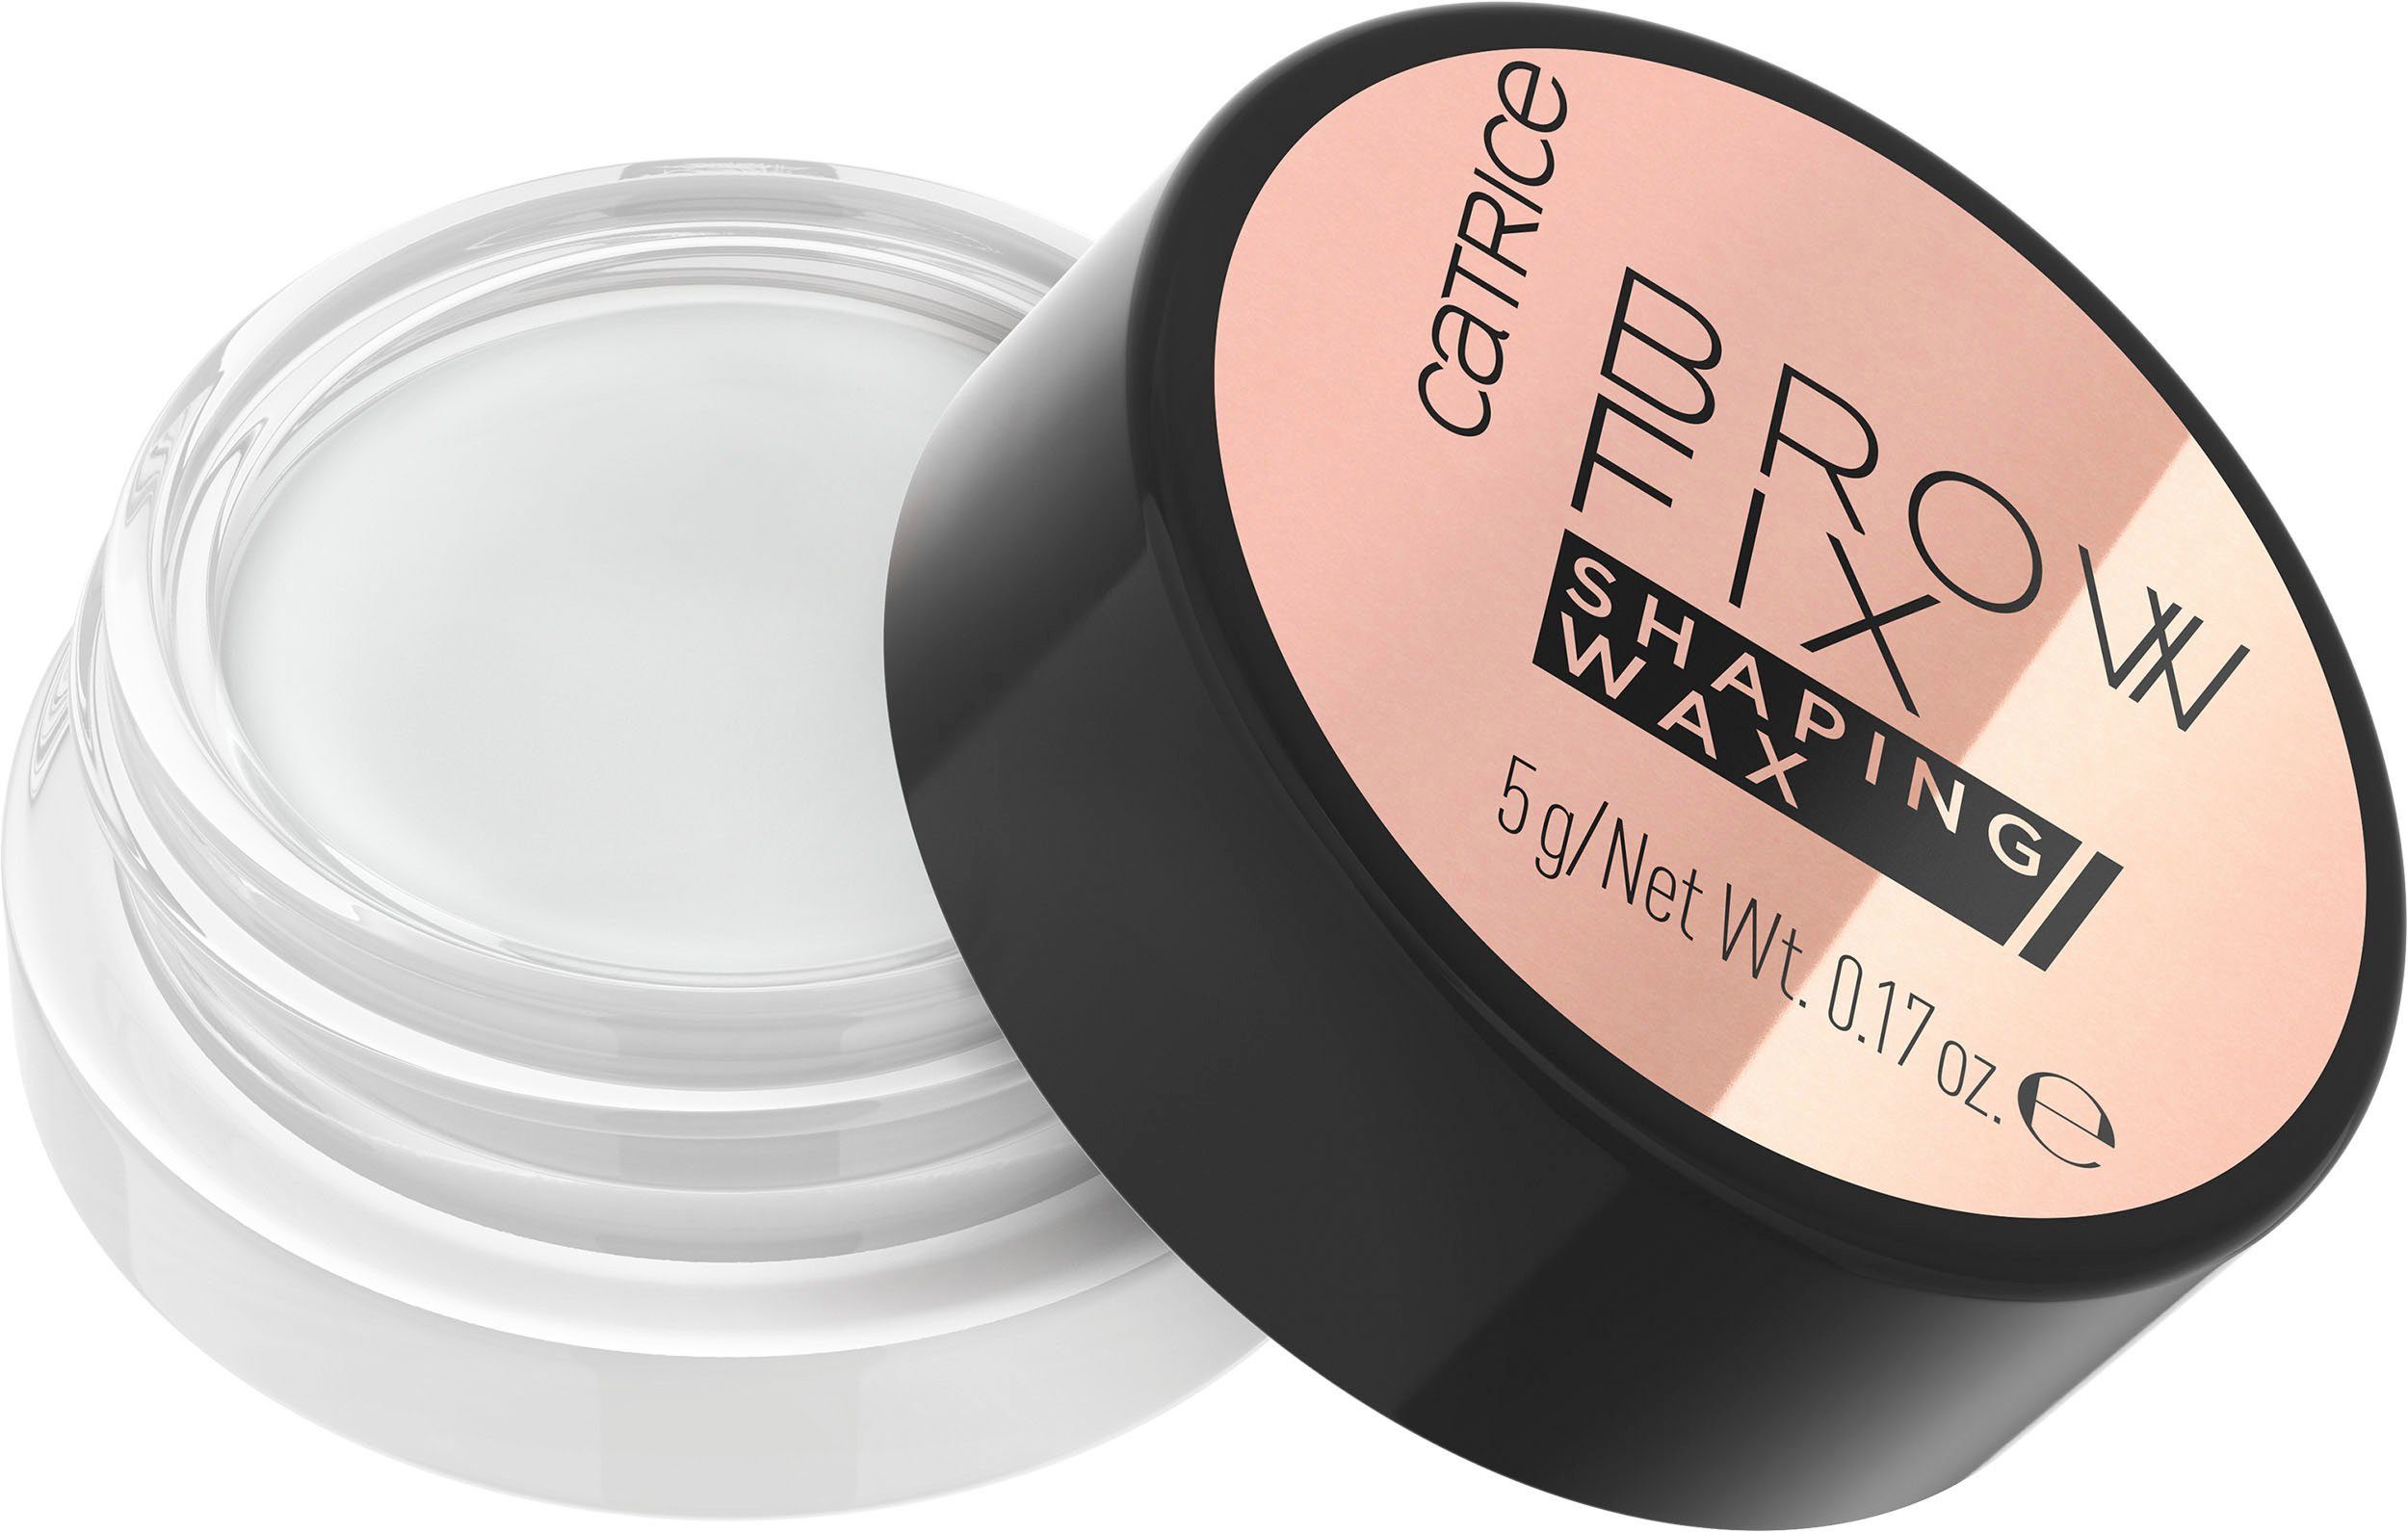 010, Augenbrauen-Gel Catrice 3-tlg. Catrice Wax Shaping Fix Brow